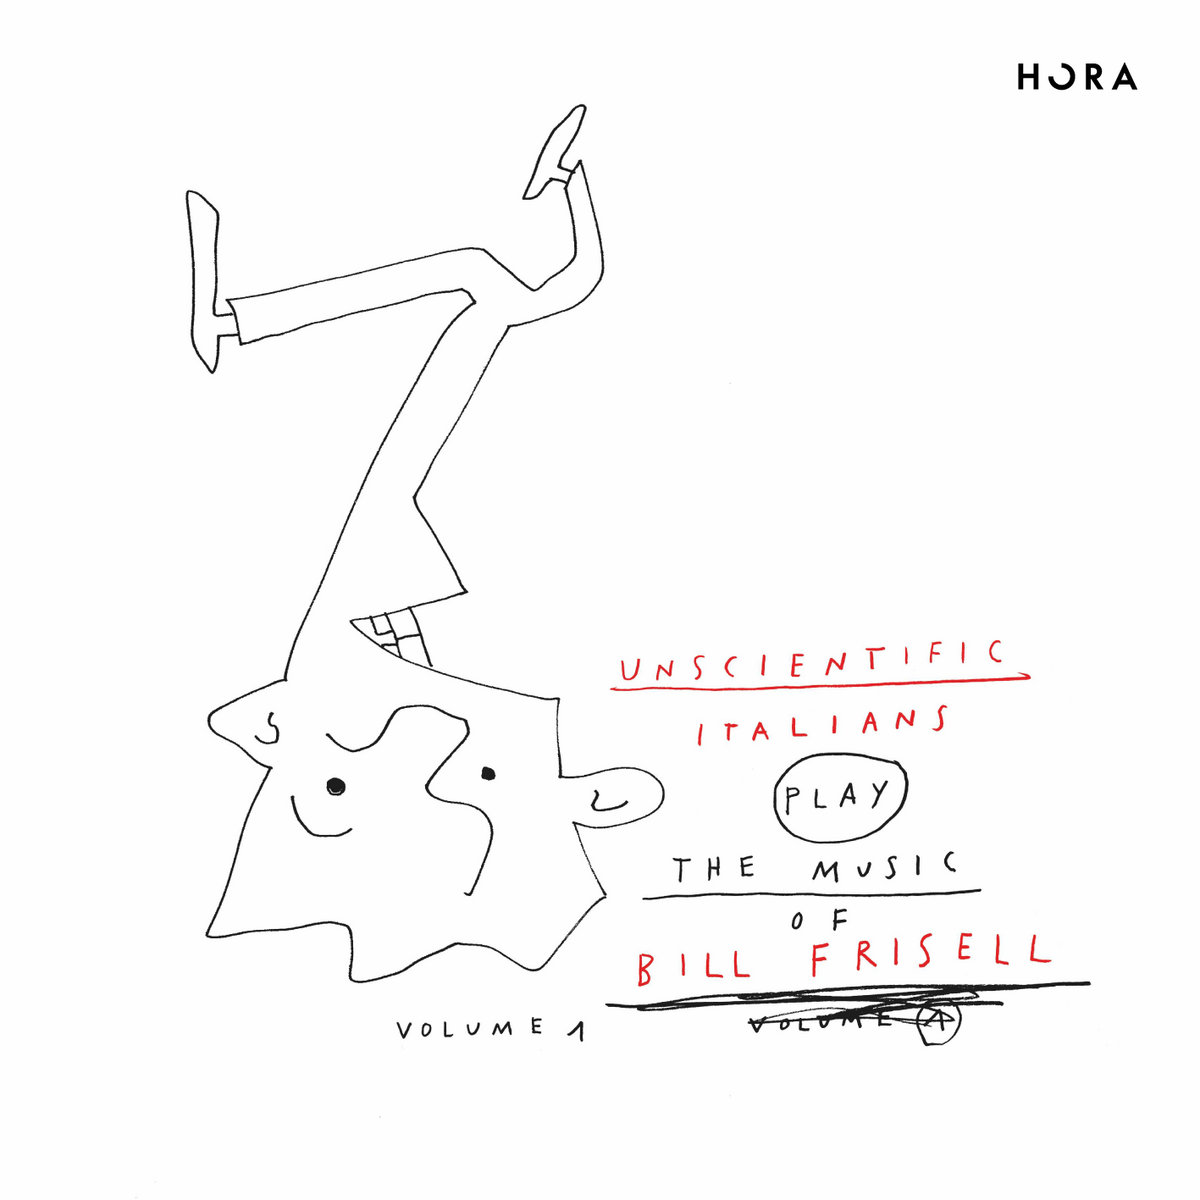 13. Unscientific Italians, Play the Music of Bill Frisell Vol.1, Hora